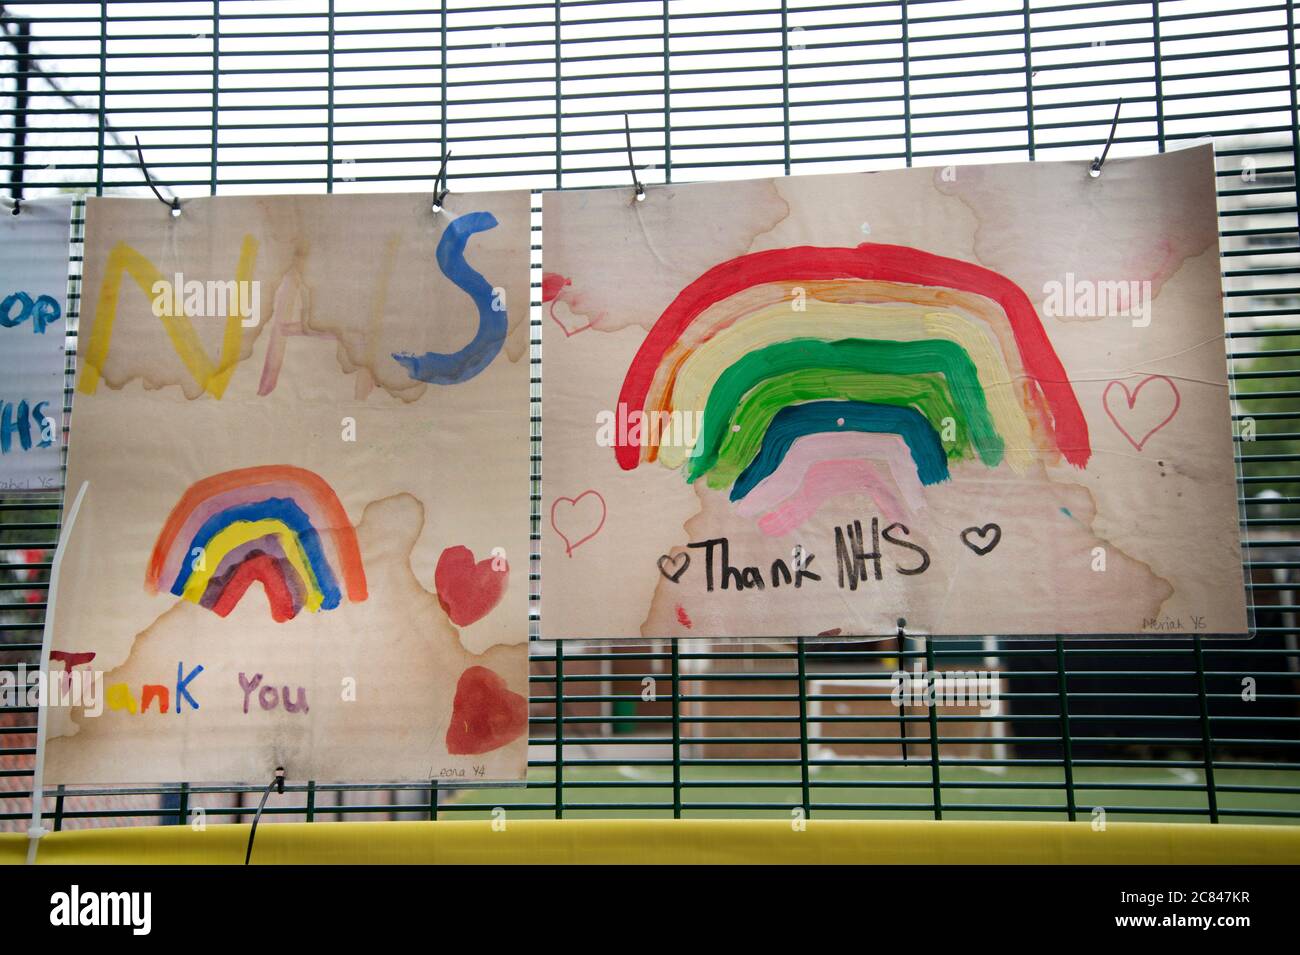 Old Street, London during the pandemic, July 2020. St Luke's Primary School. Rainbows painted by children to thank the NHS Stock Photo